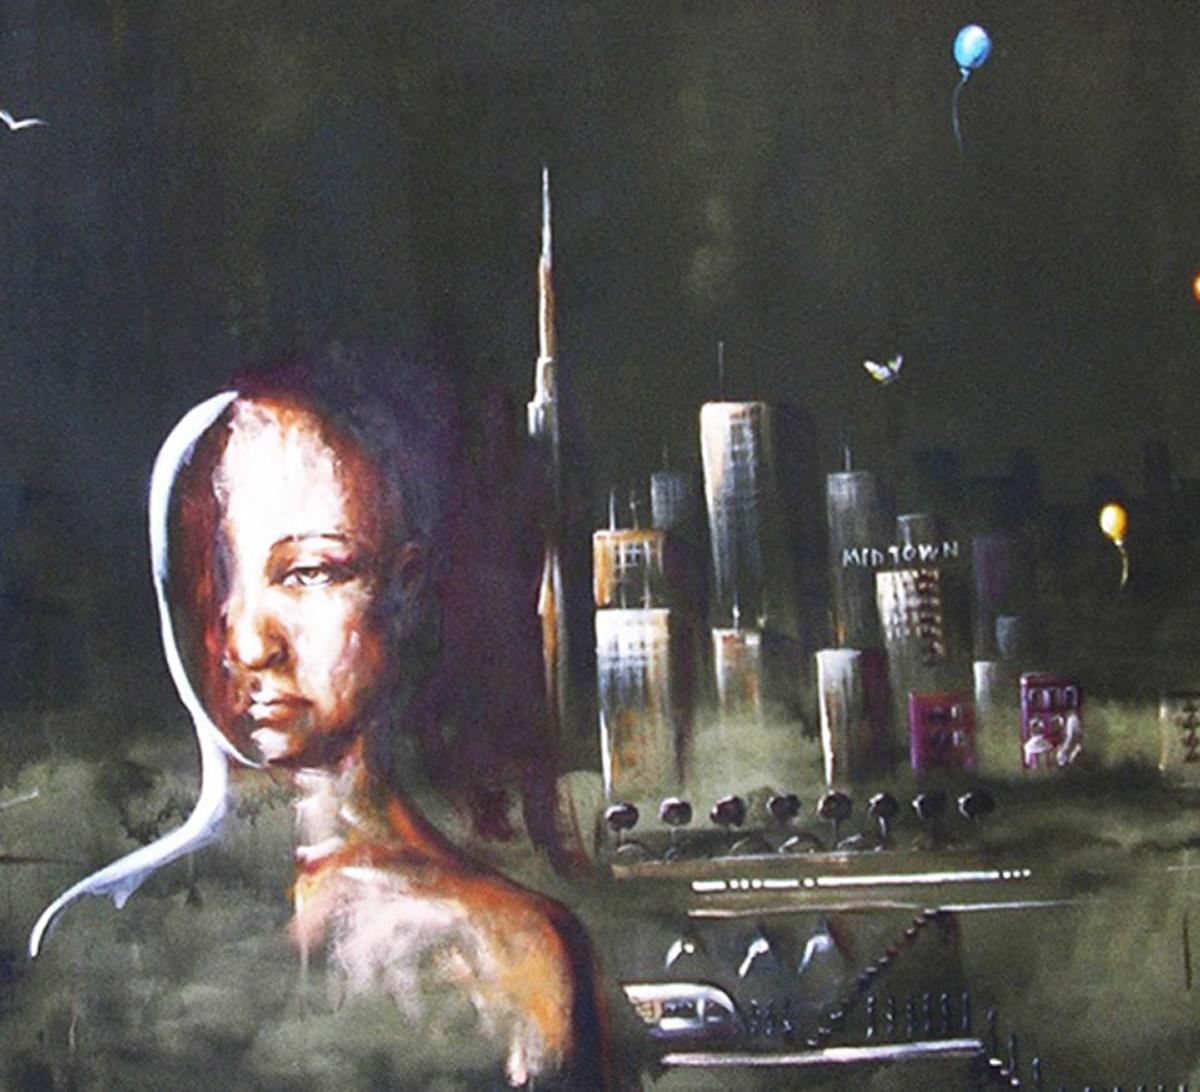 Painted Painting Acrilyc on Canvas by Rabanillo de la Fuente ¨Between Two Worlds¨ For Sale